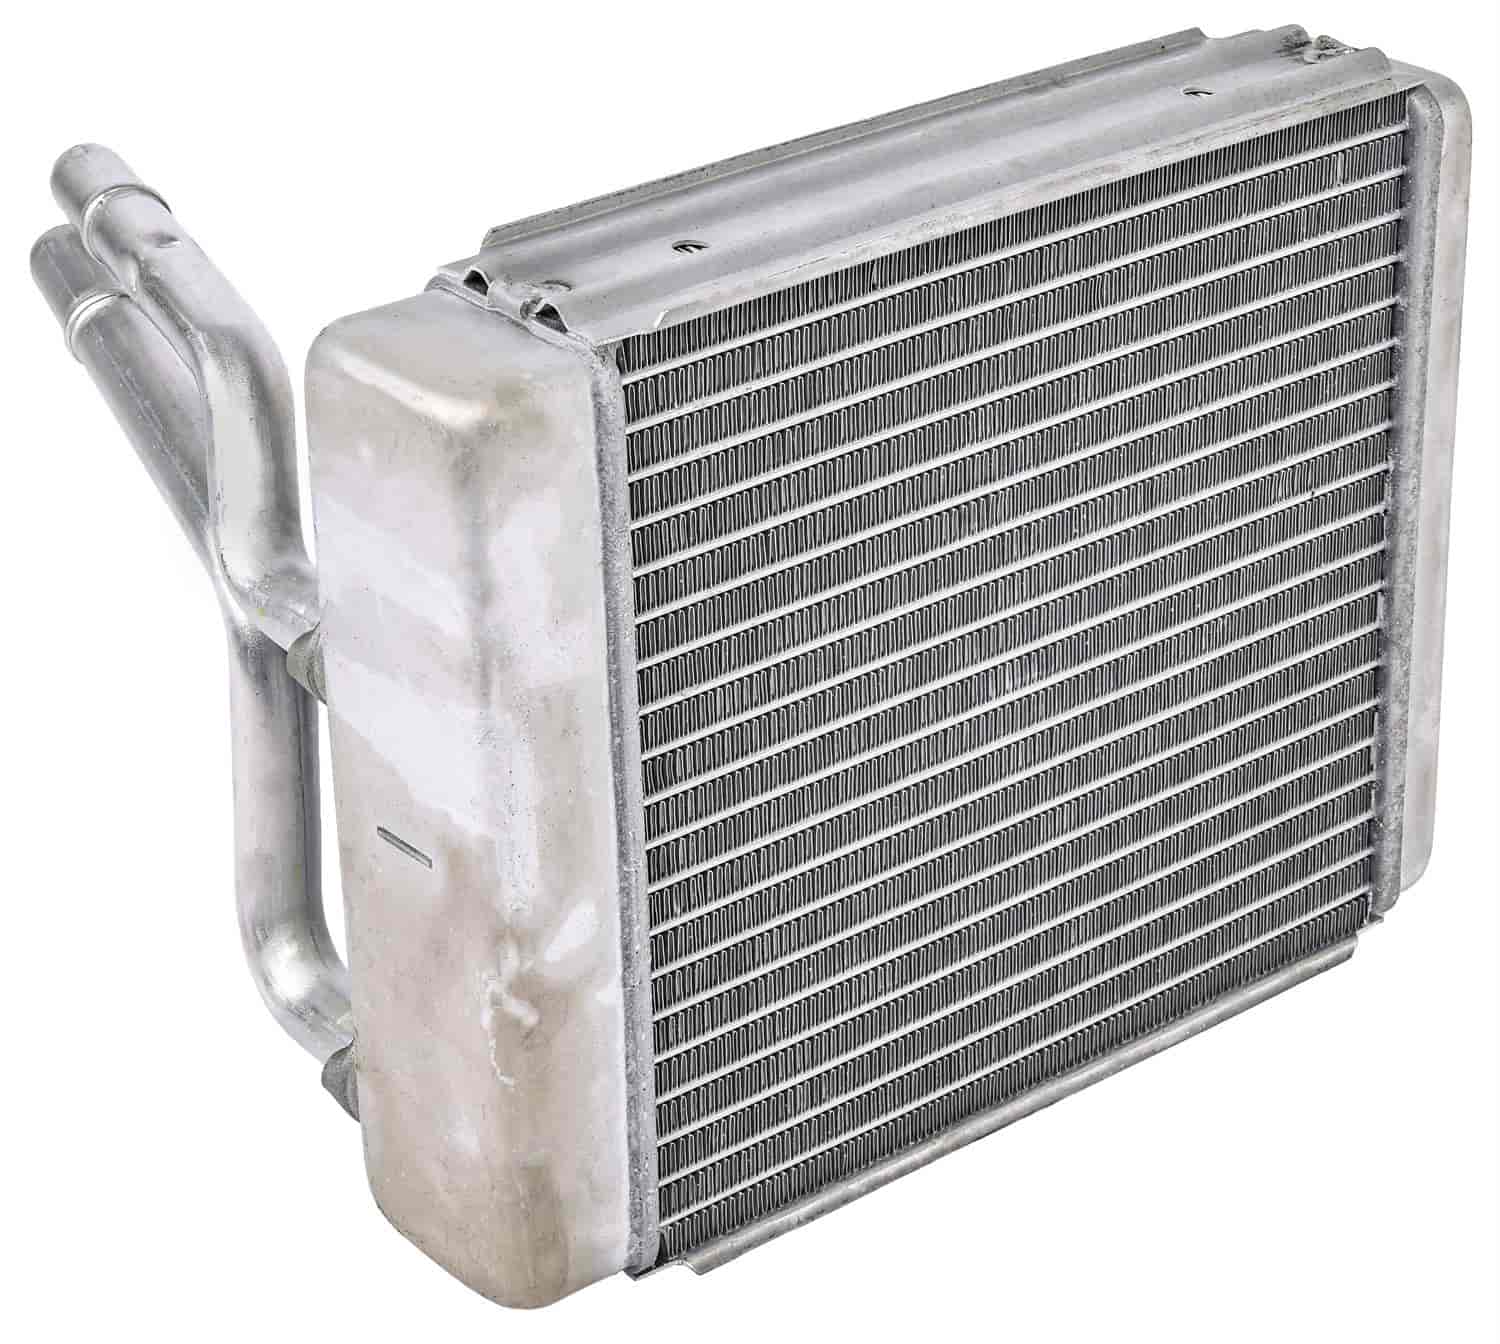 Heater Core for 1997-2004 Ford Expedition, F-Series Trucks, Lincoln Navigator